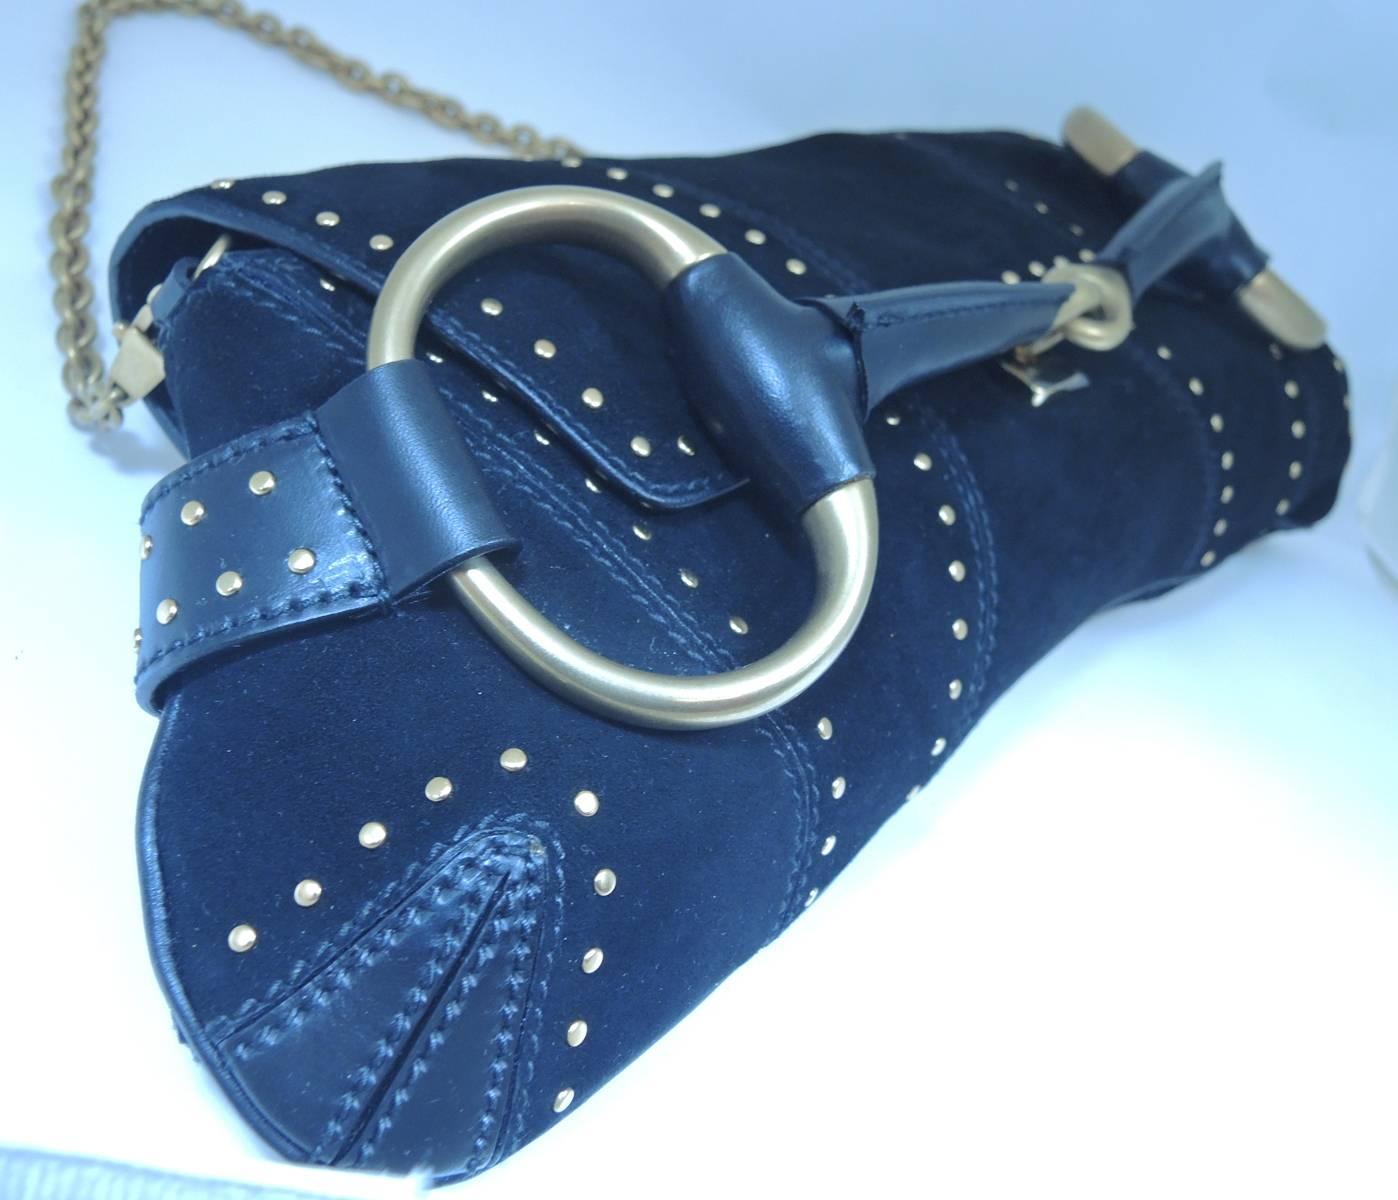 This is an authentic beautiful couture designer Gucci handbag that is made of black leather suede. The entire outside lining of the bag has small round gold-tone decor and the inside has a soft leather lining. The strap has a golden link chain that